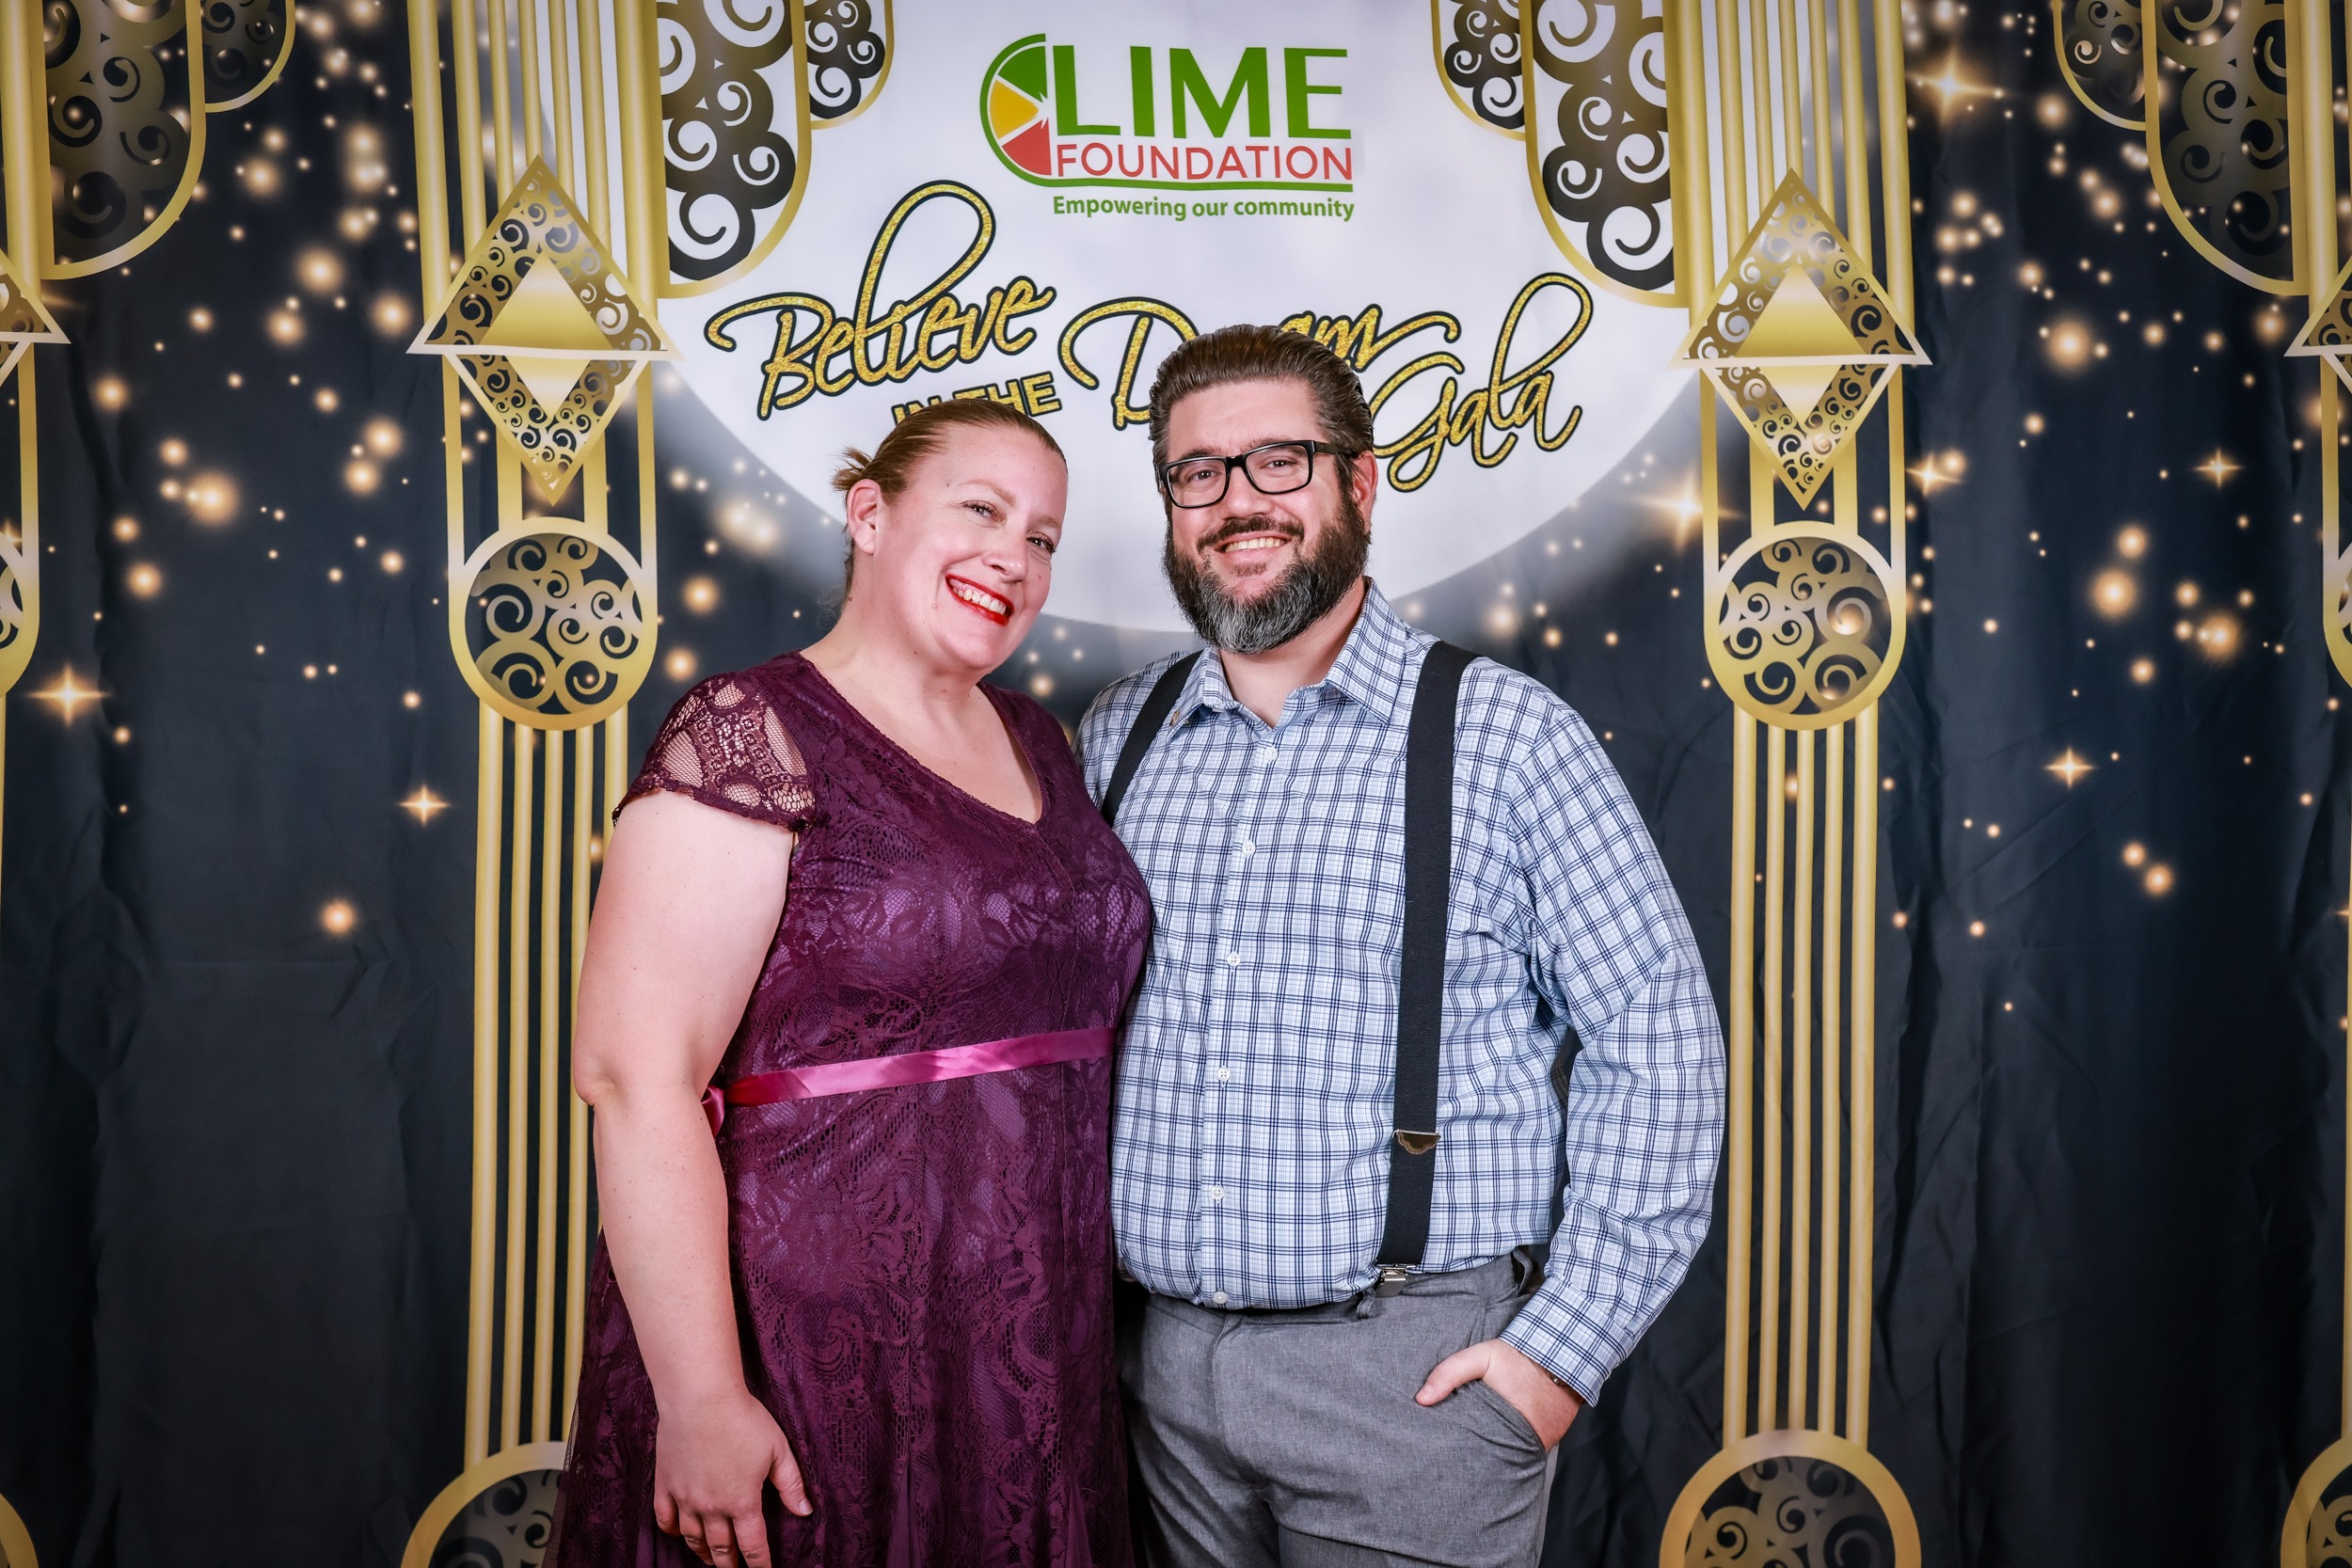 A man and woman posing in front of a photo booth at a non-profit event.